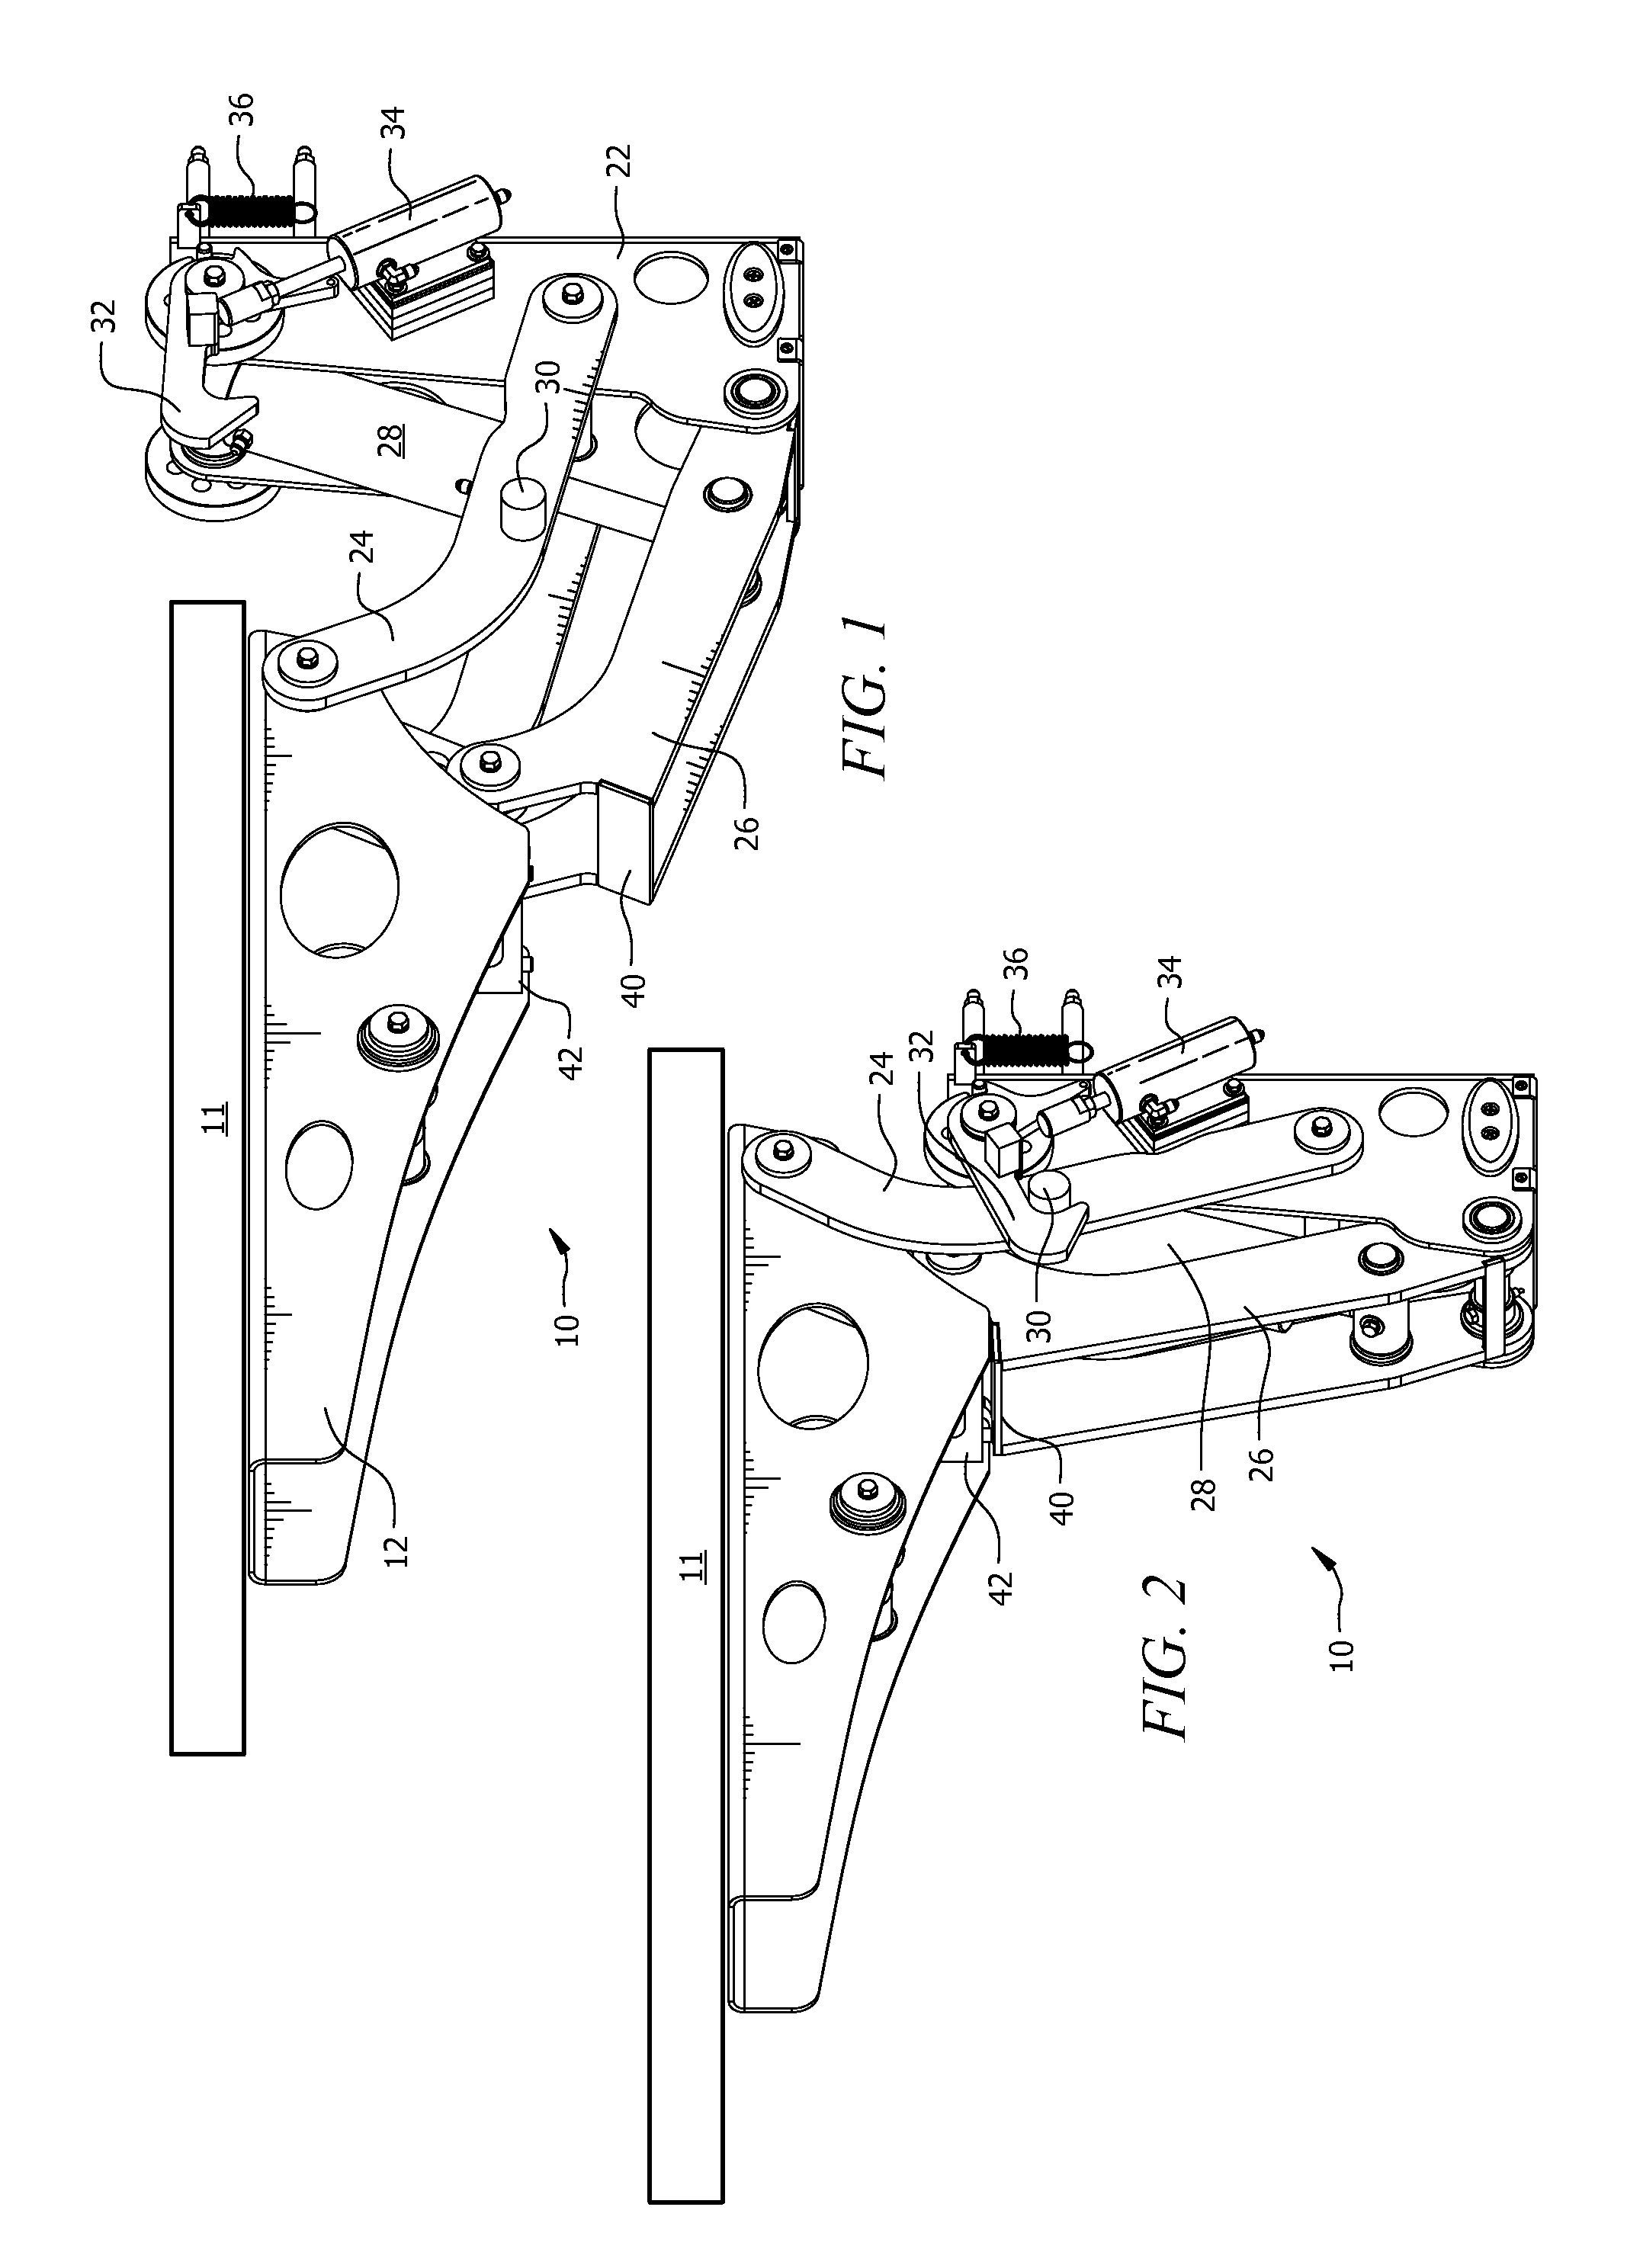 Lift mechanism for lifting a swim platform above and over a rear deck of a boat